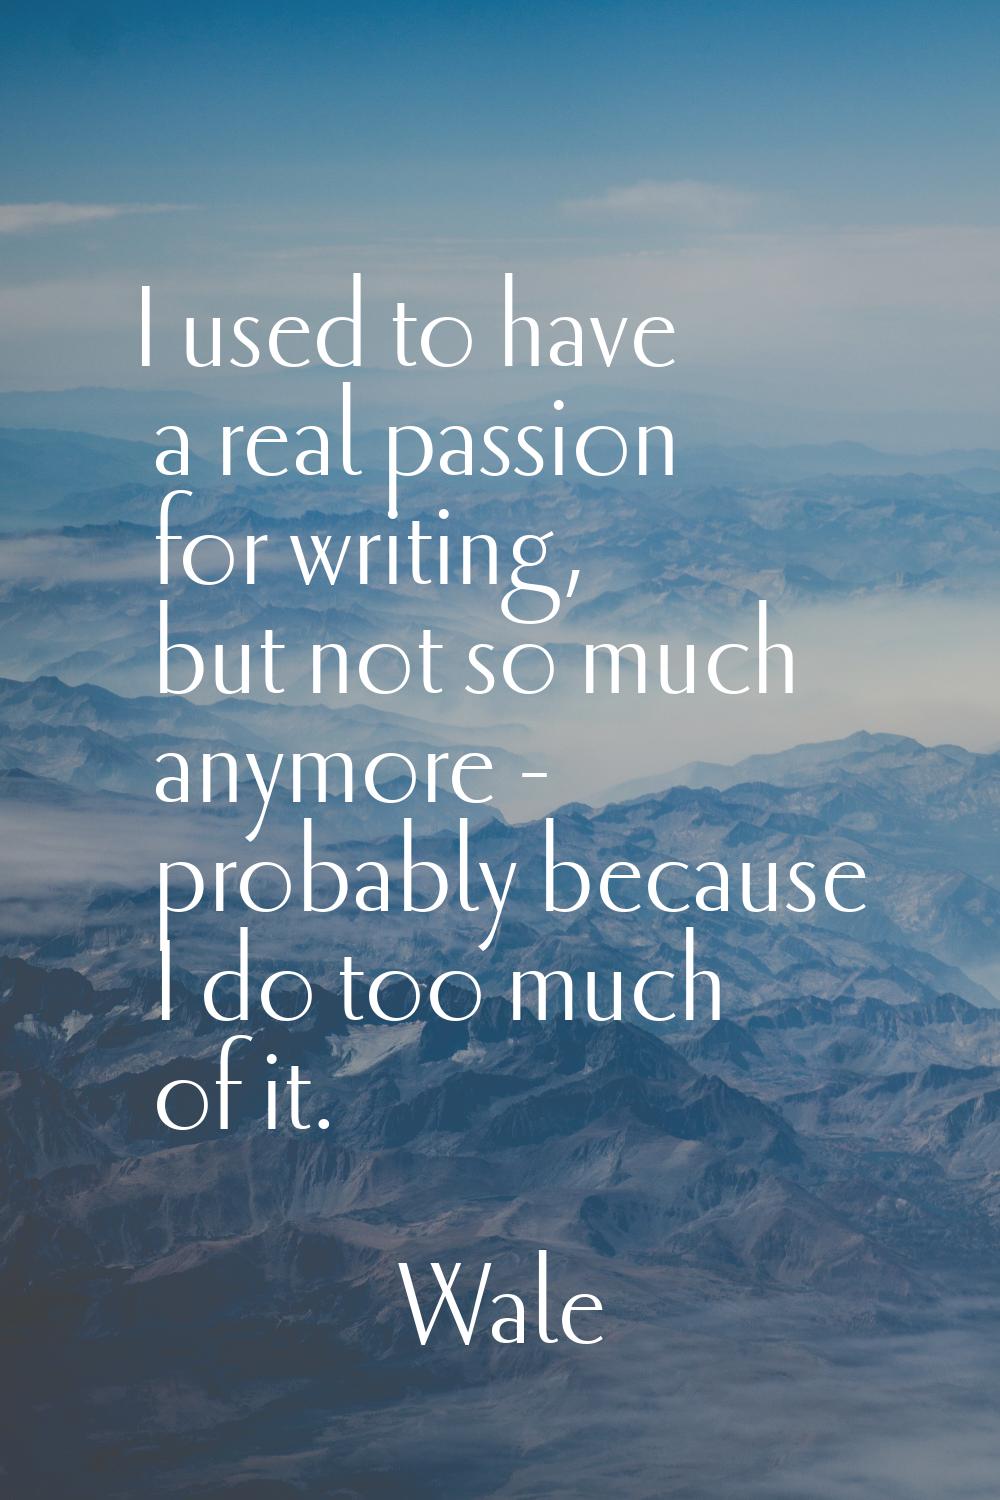 I used to have a real passion for writing, but not so much anymore - probably because I do too much